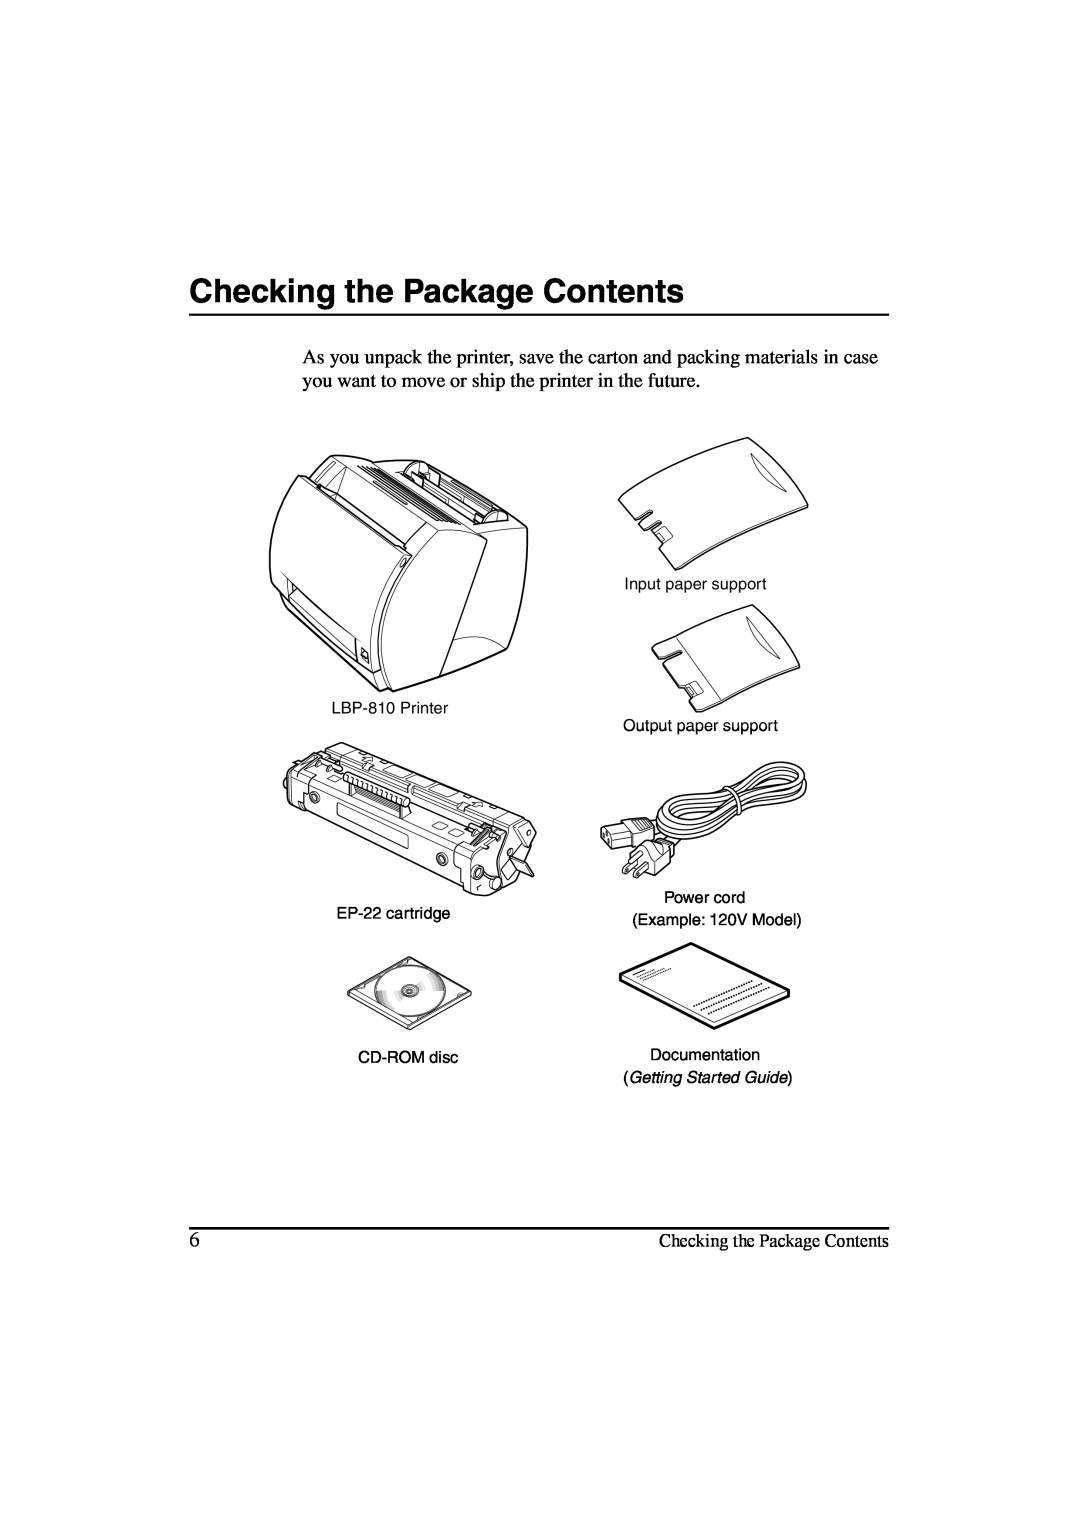 Canon LBP-810 manual Checking the Package Contents, Example: 120V Model, Documentation, Getting Started Guide 